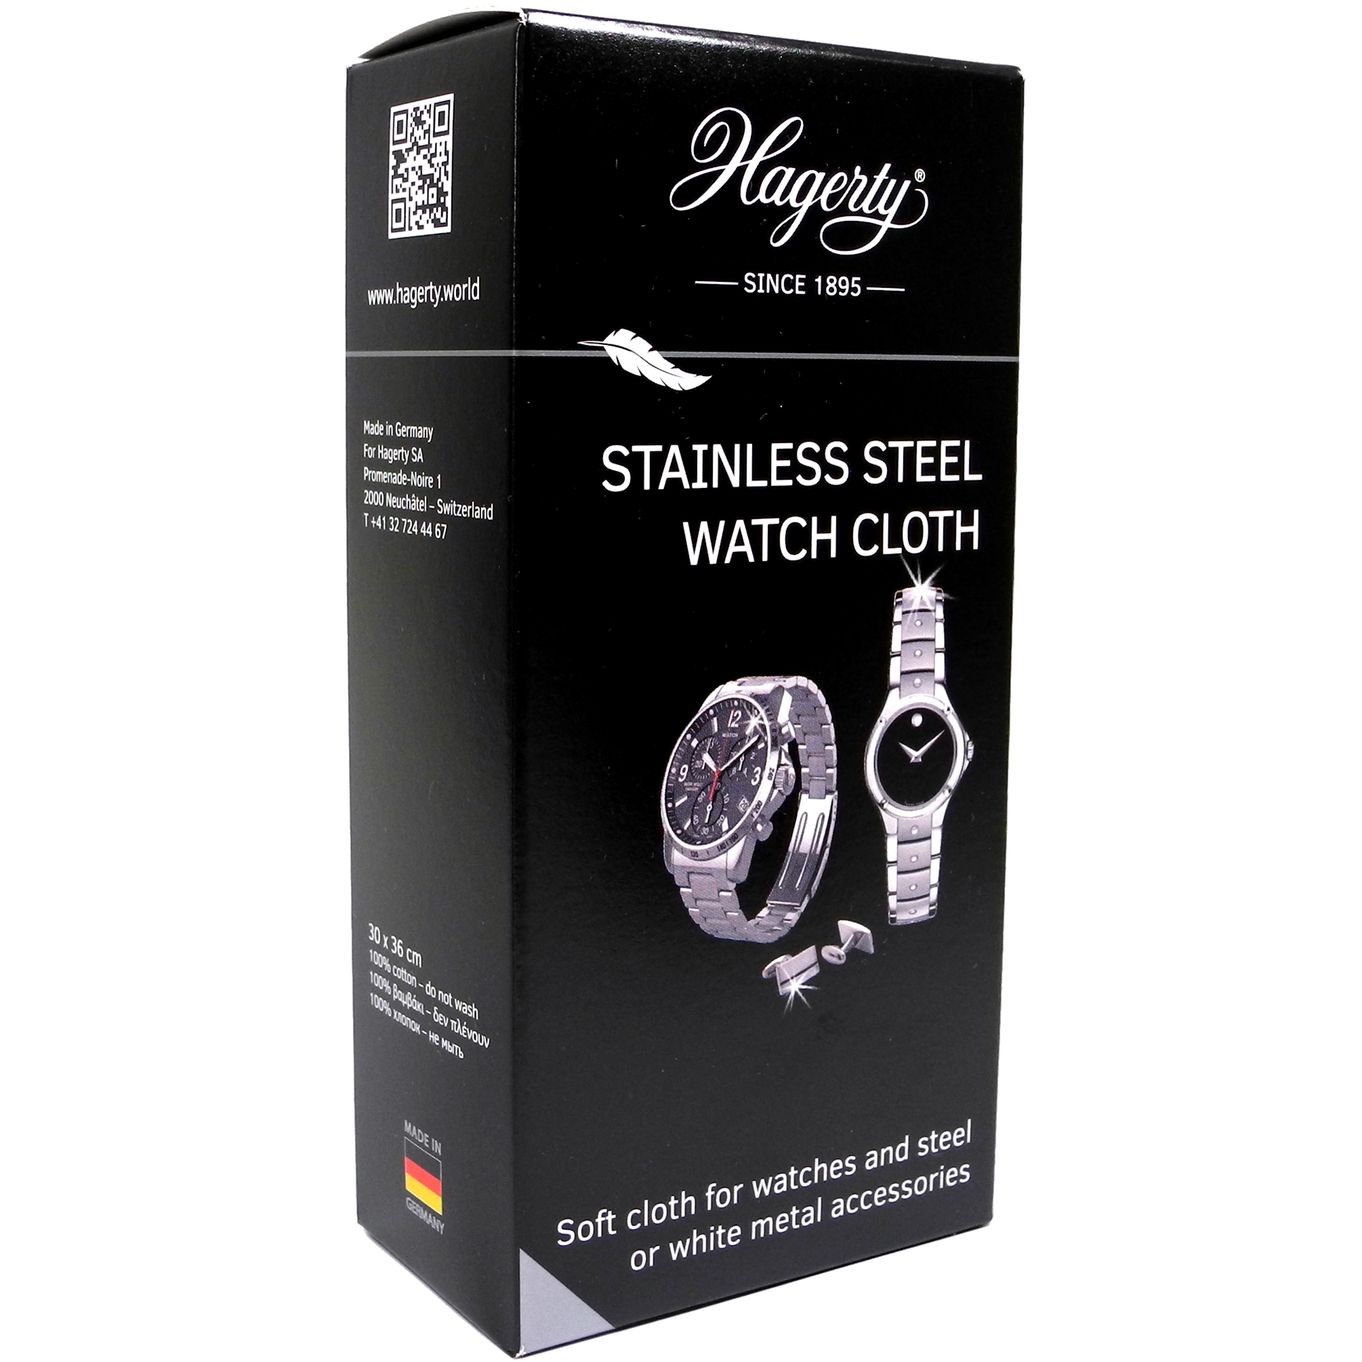 HAGERTY Stainless Steel Cloth special cloth for stainless steel